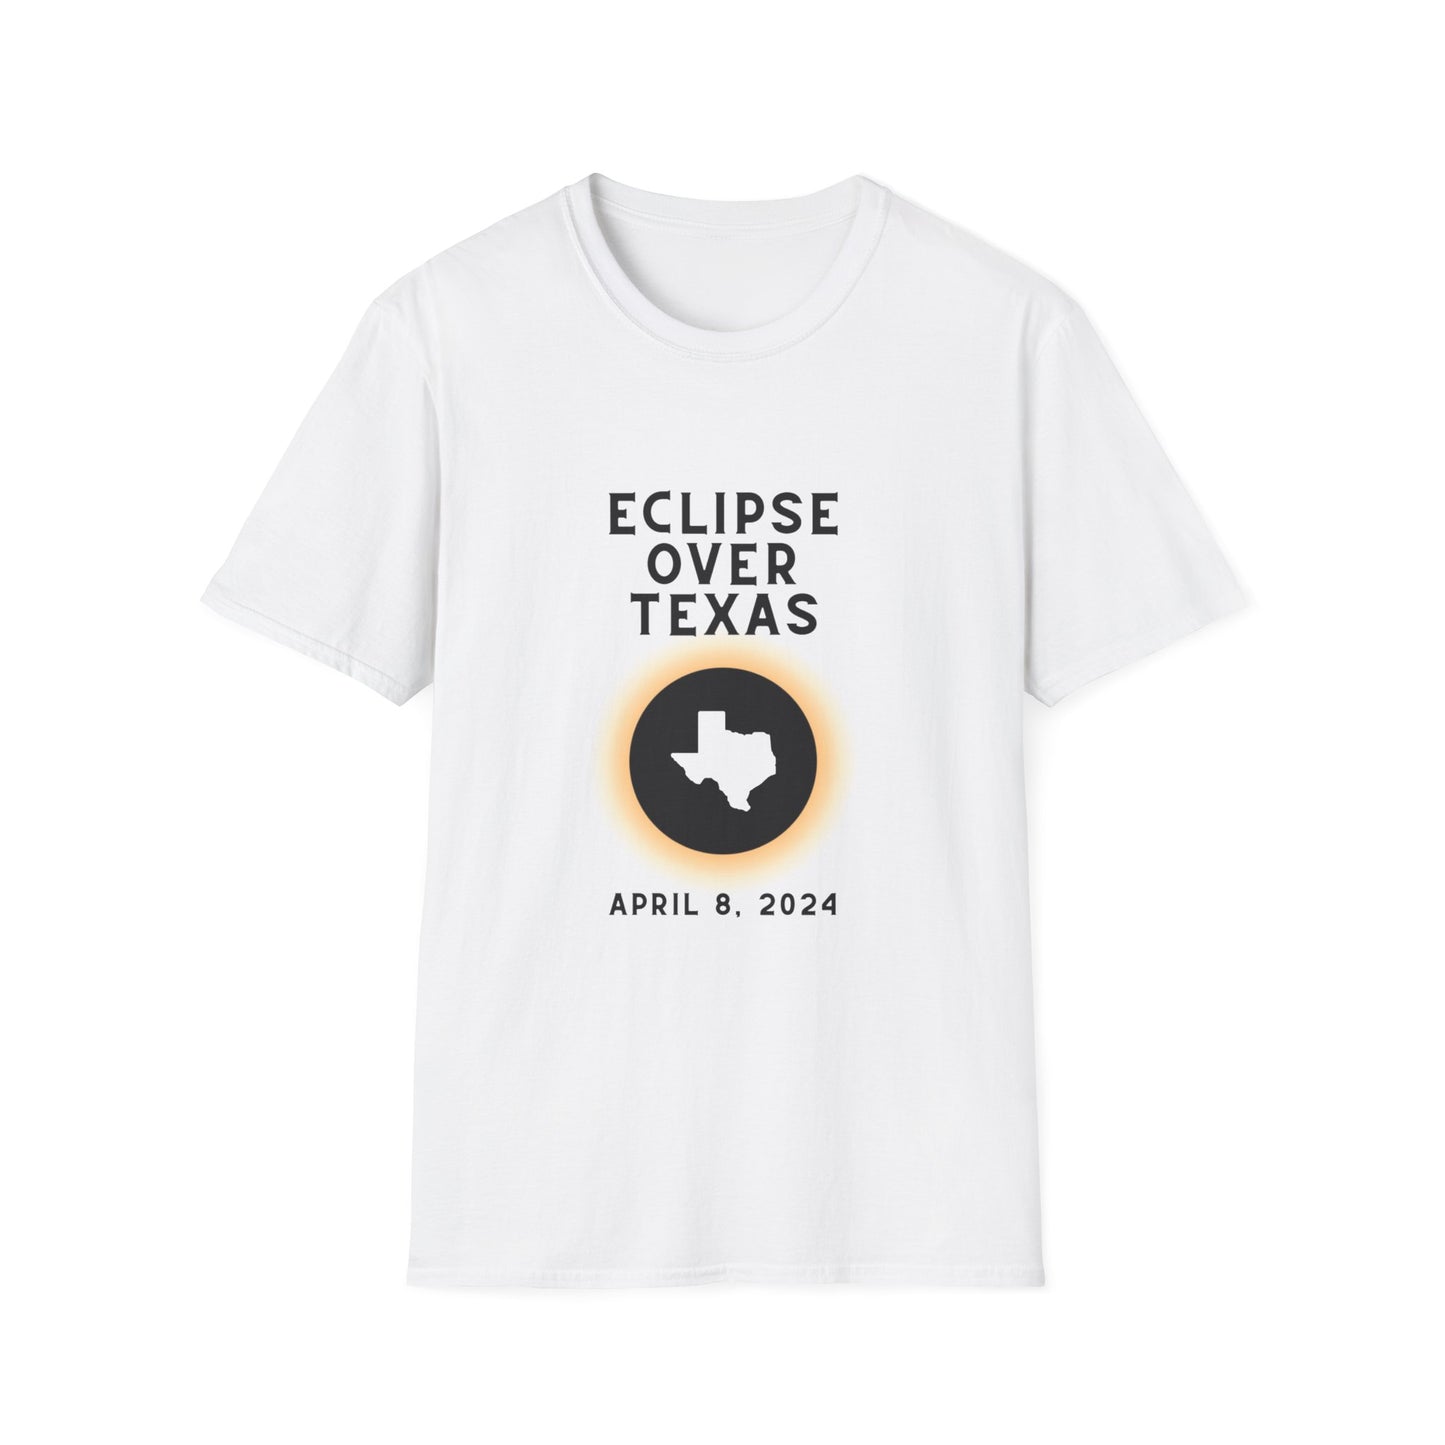 Eclipse Over Texas T-Shirt for the Total Solar Eclipse